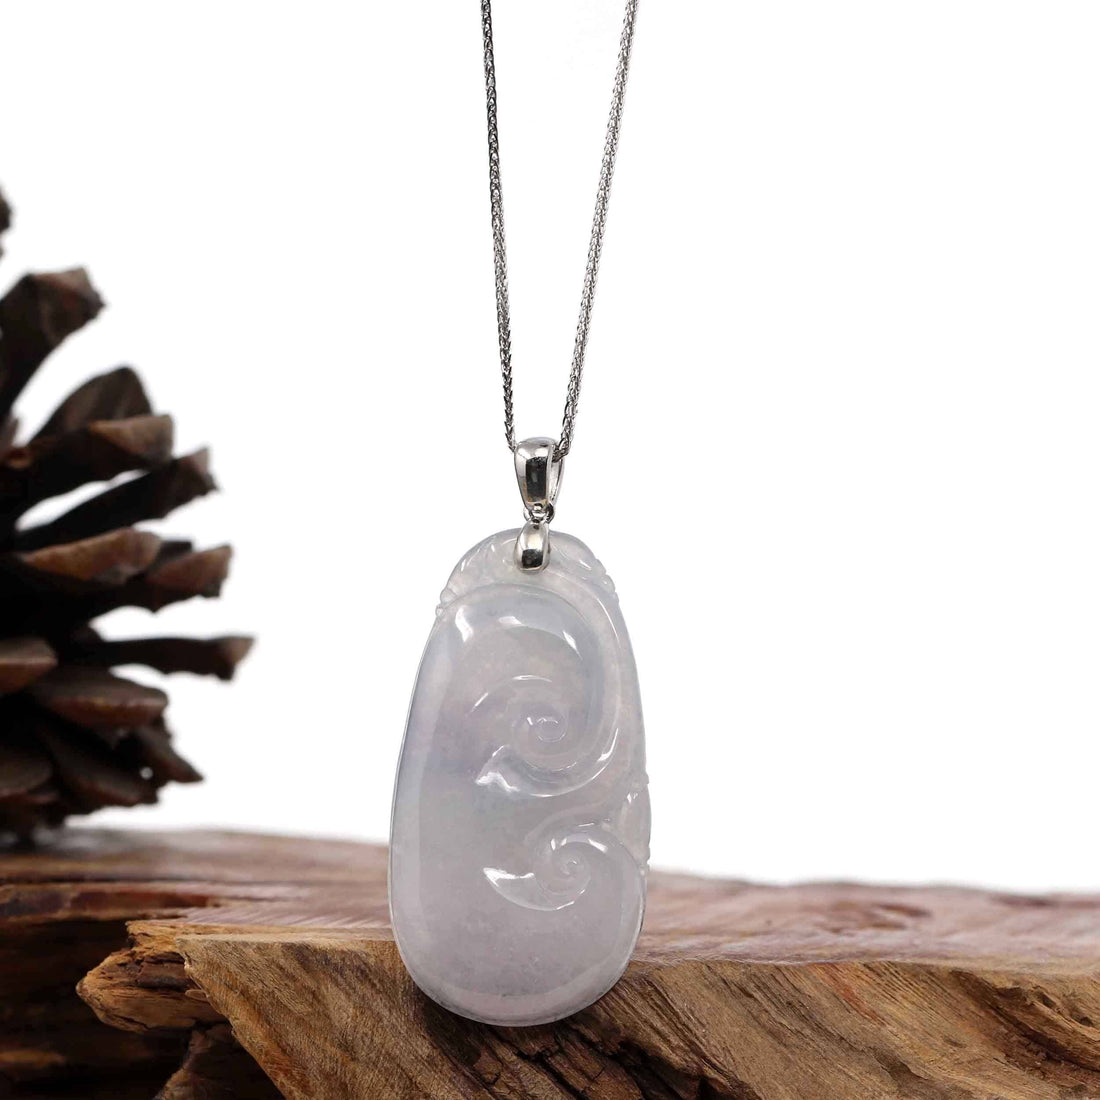 Baikalla Jewelry Jade Guanyin Pendant Necklace Copy of Copy of Genuine Lavender Jadeite Jade Ru Yi Pendant Necklace With Sterling Silver Bail